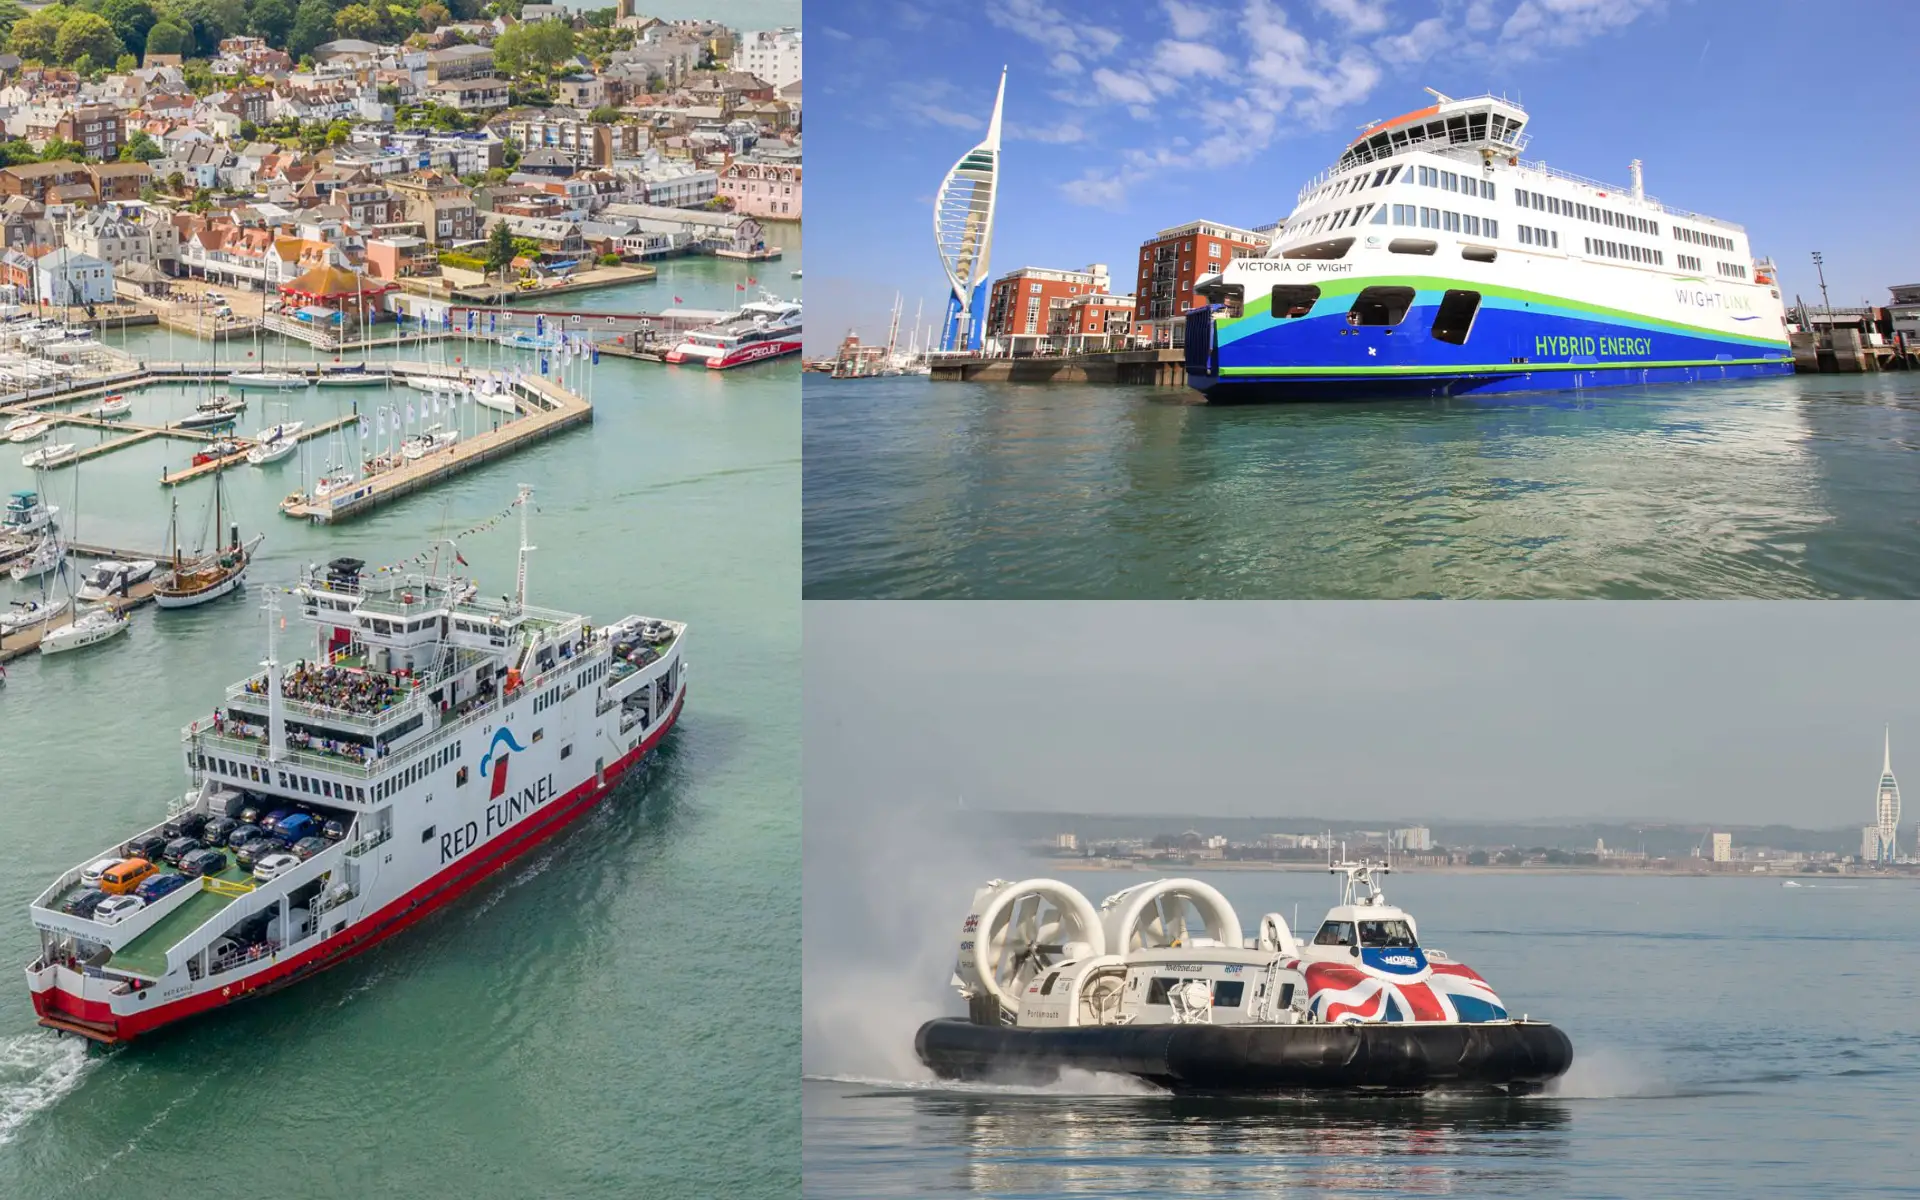 Red Funnel Wightlink ferries and Hovercraft